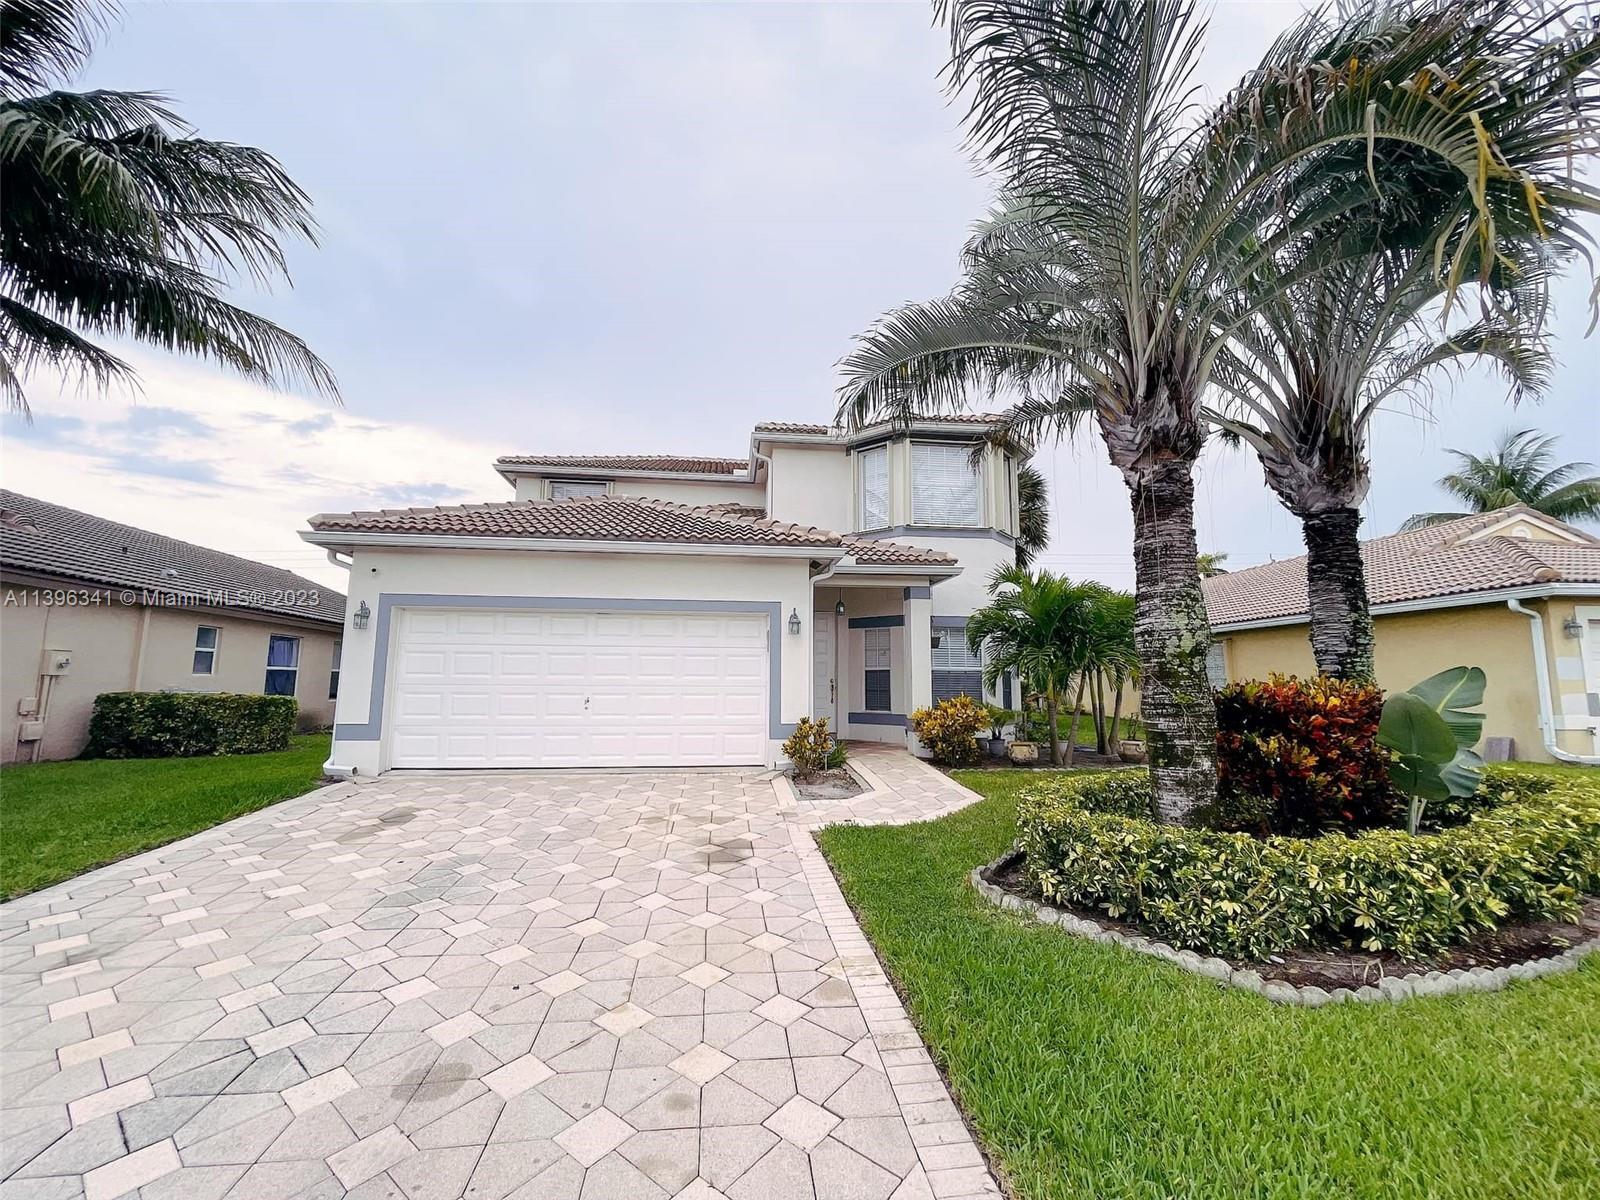 Your search is over! Beautiful in Boynton Beach. Gated Community, Cul-de-sac, Fully Renovated Home, 